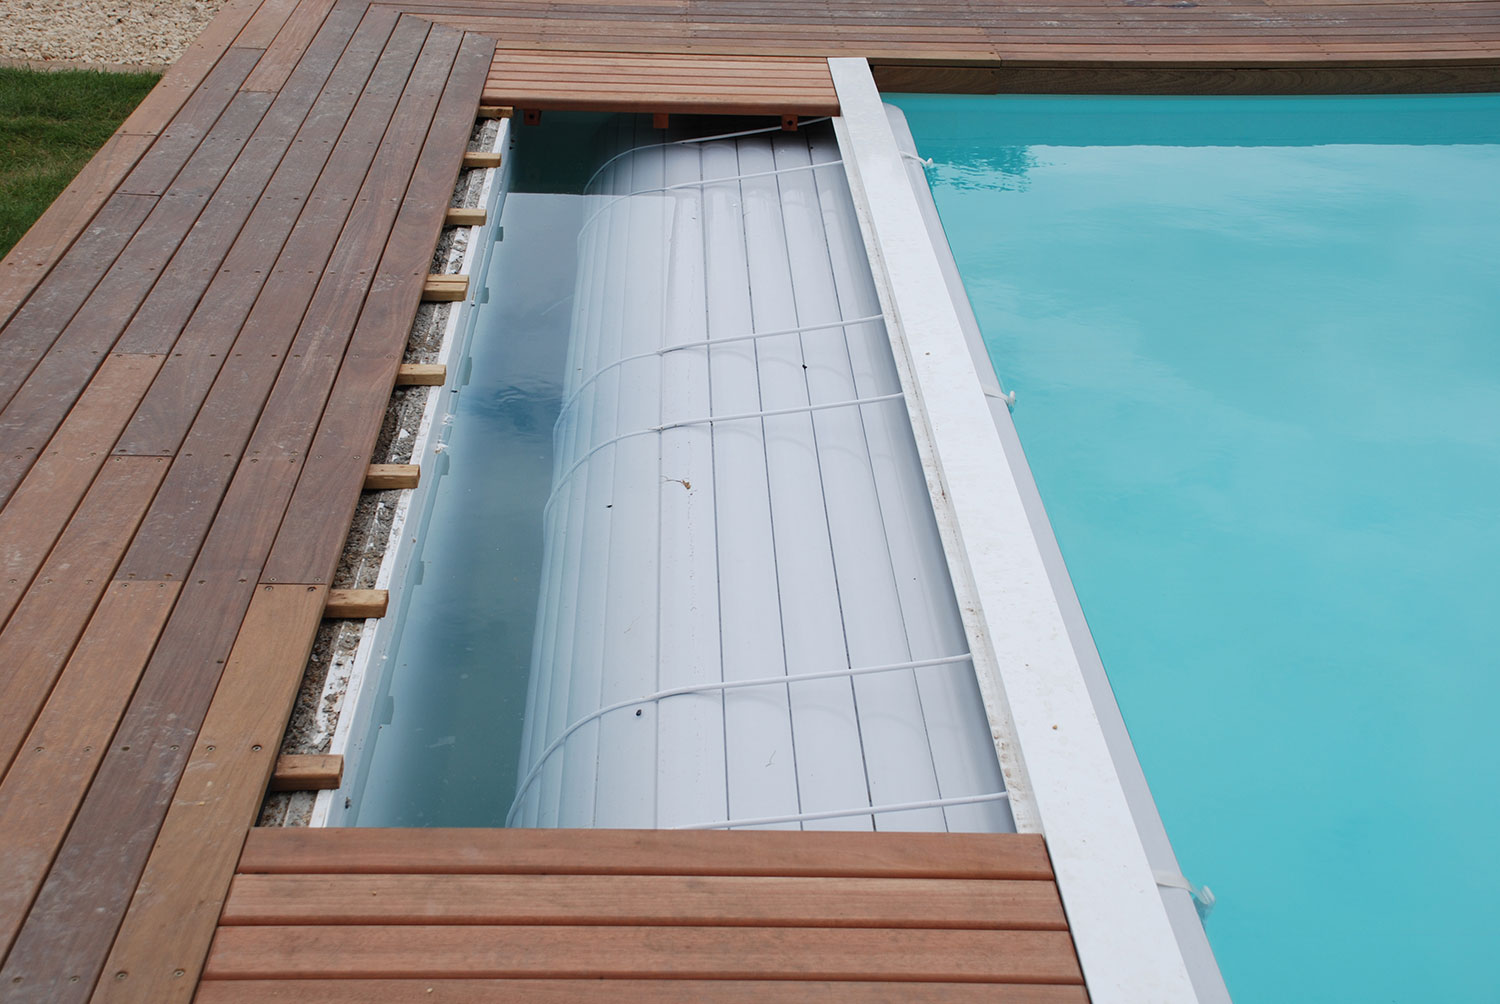 Submerged Slatted Integrated Security Pool Covers